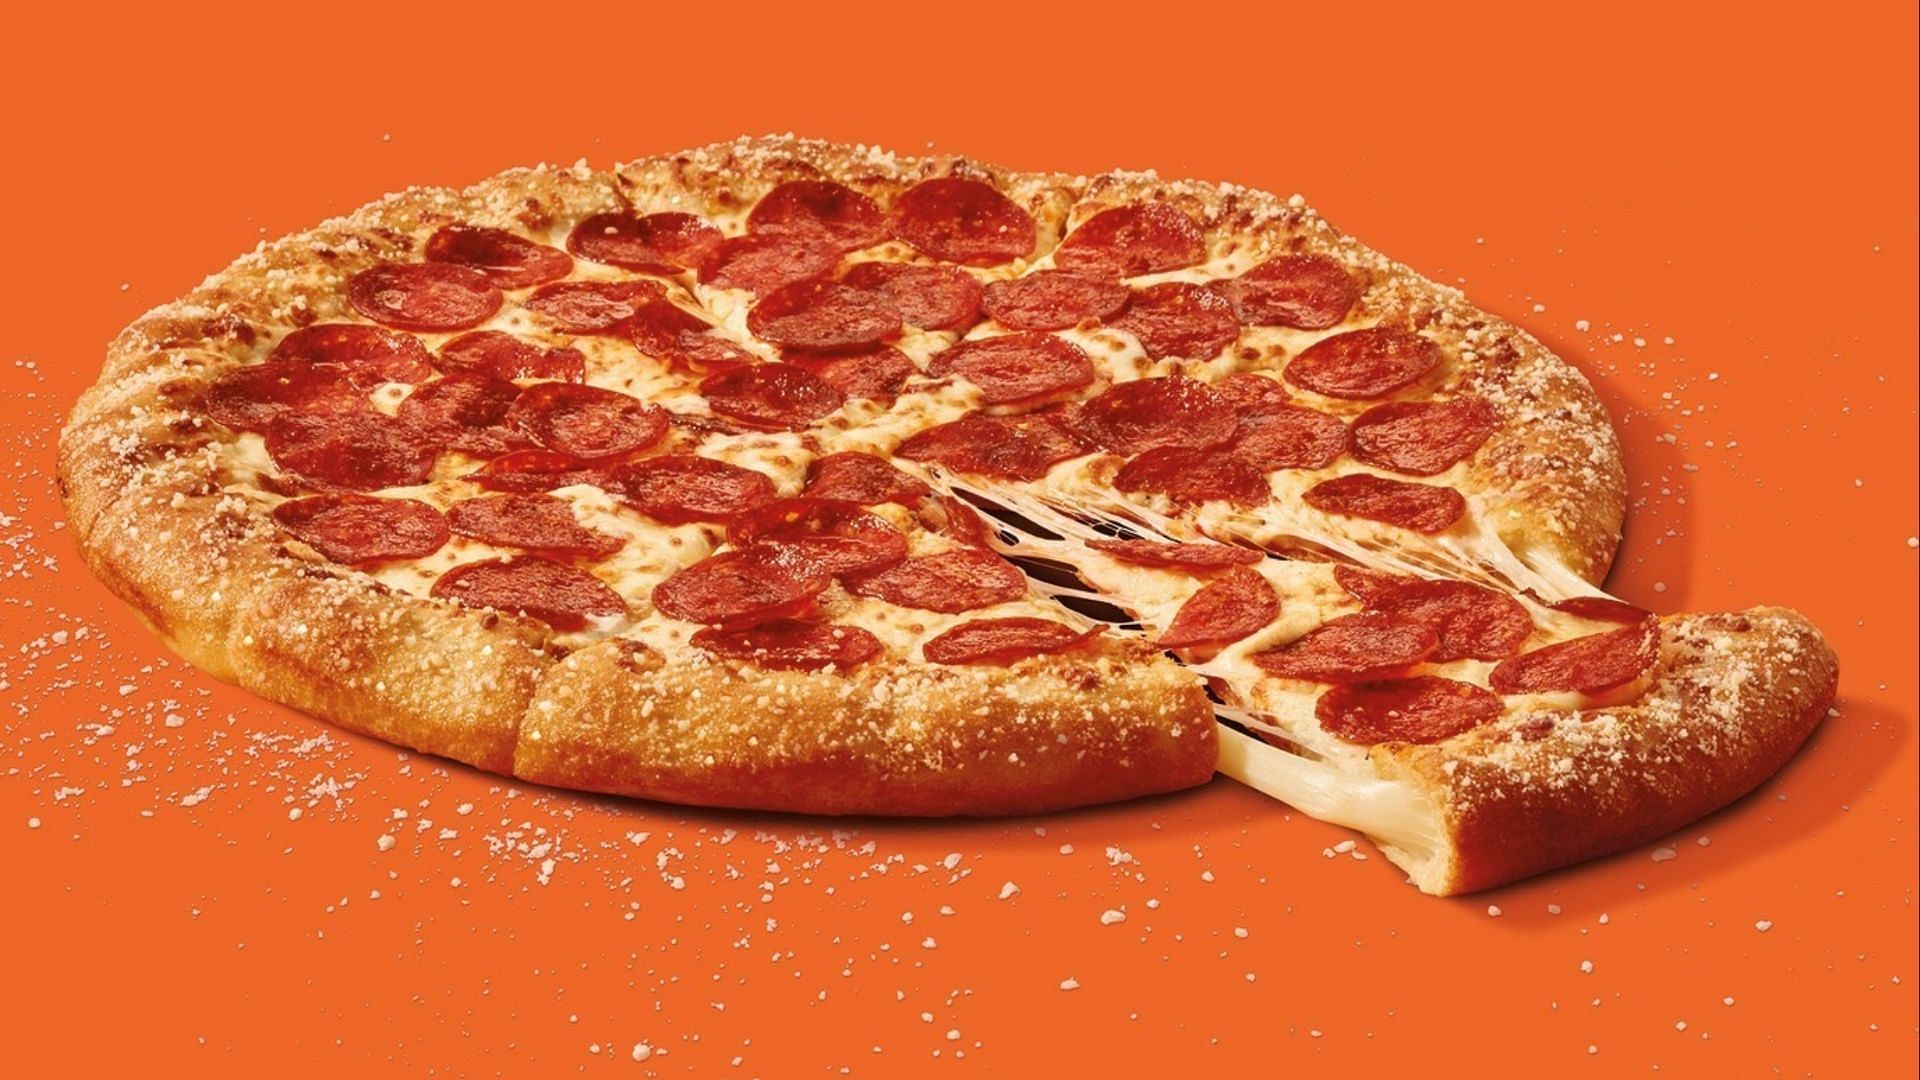 The new Stuffed Crazy Crust Pizza can be availed for a limited time (Image via L. Caesars)